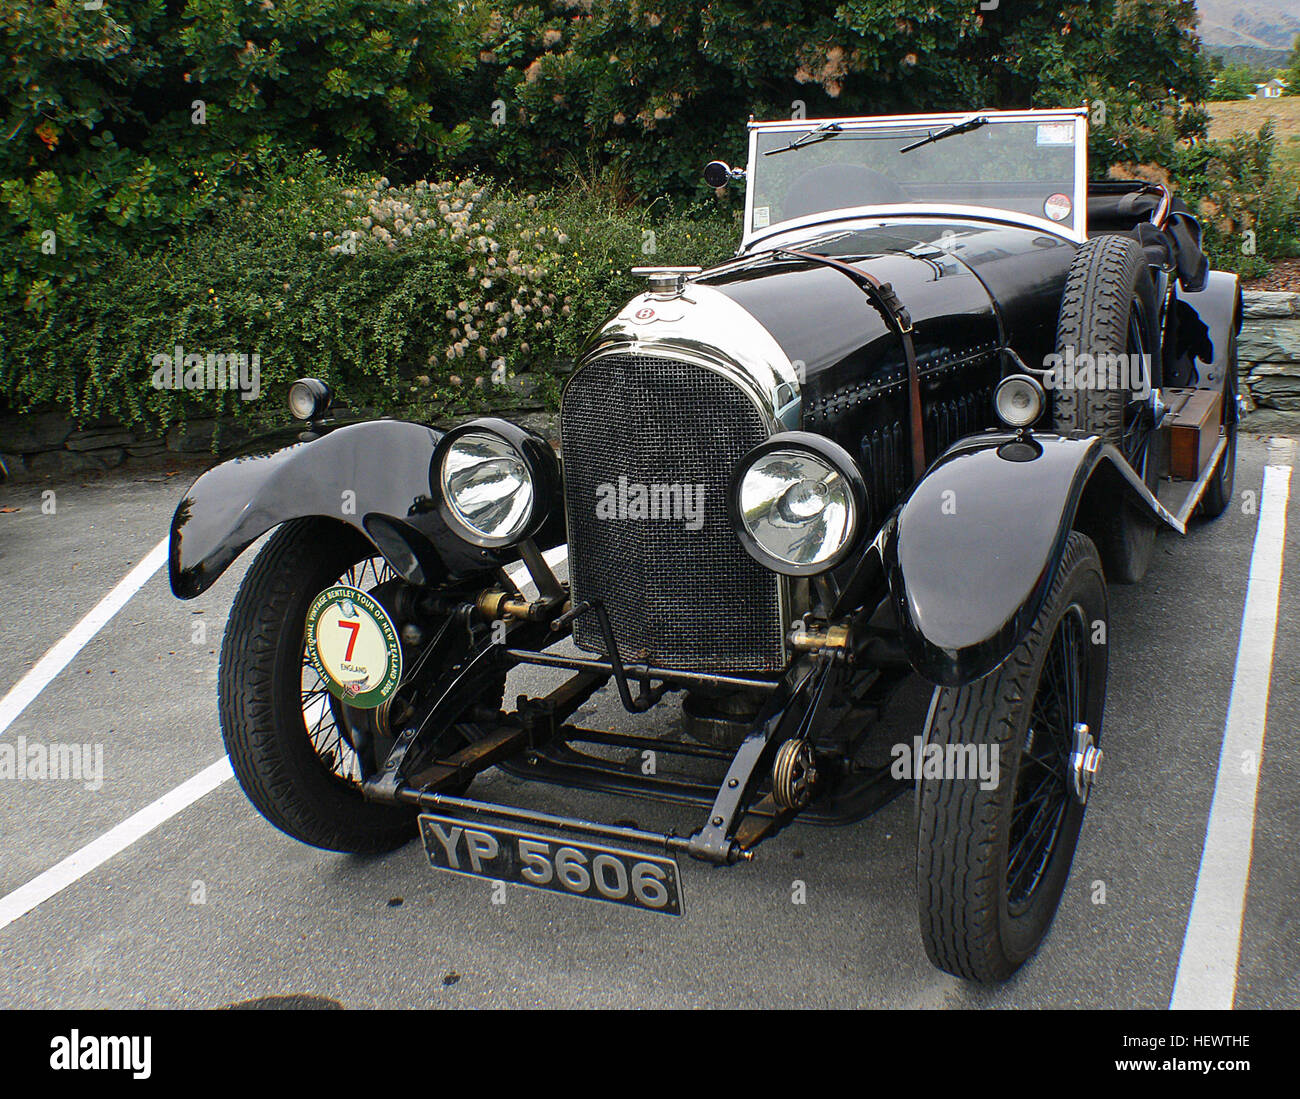 In 12 short years, Bentley became one of Britain's most revered marques through its cars' technical sophistication and enviable record in long-distance racing events, including winning the Le Mans 24-hour race five times.  Designed by Walter Owen Bentley and his colleagues, the 3-Litre was the progenitor of the 4.5-, 6.5- and 8-Litre Bentleys. The 3-Litre combined several developments not previously seen in road-going cars, including an overhead camshaft driving four valves per cylinder, the first use of aluminum pistons in an automobile engine, pent-roof combustion chambers, dual magneto igni Stock Photo